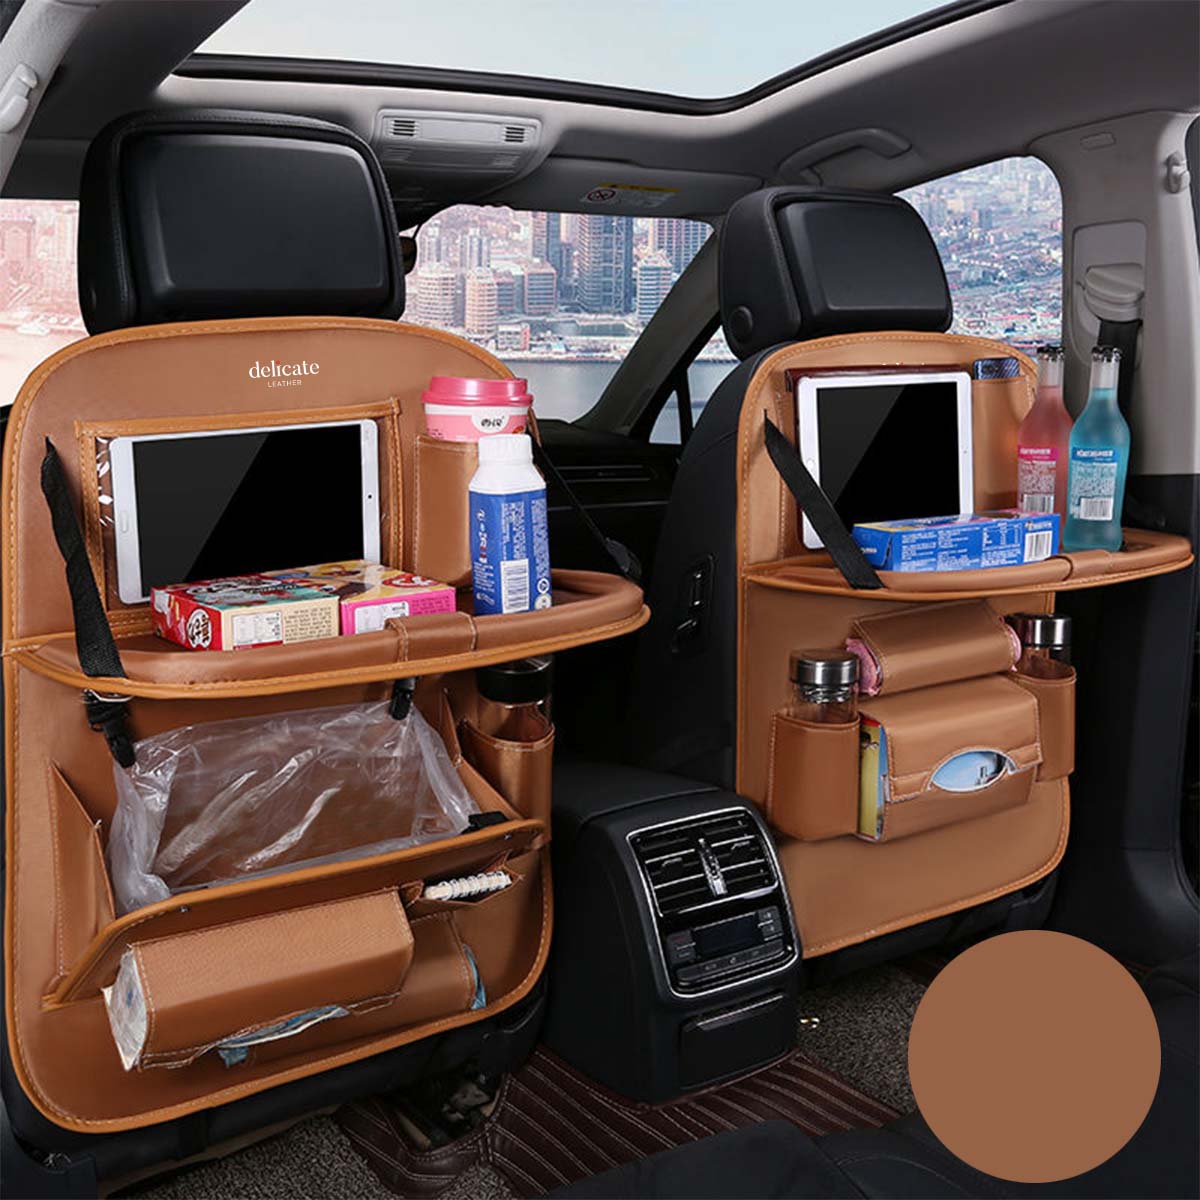 Delicate Leather Backseat Truck Organizer: Maximize Space and Organization